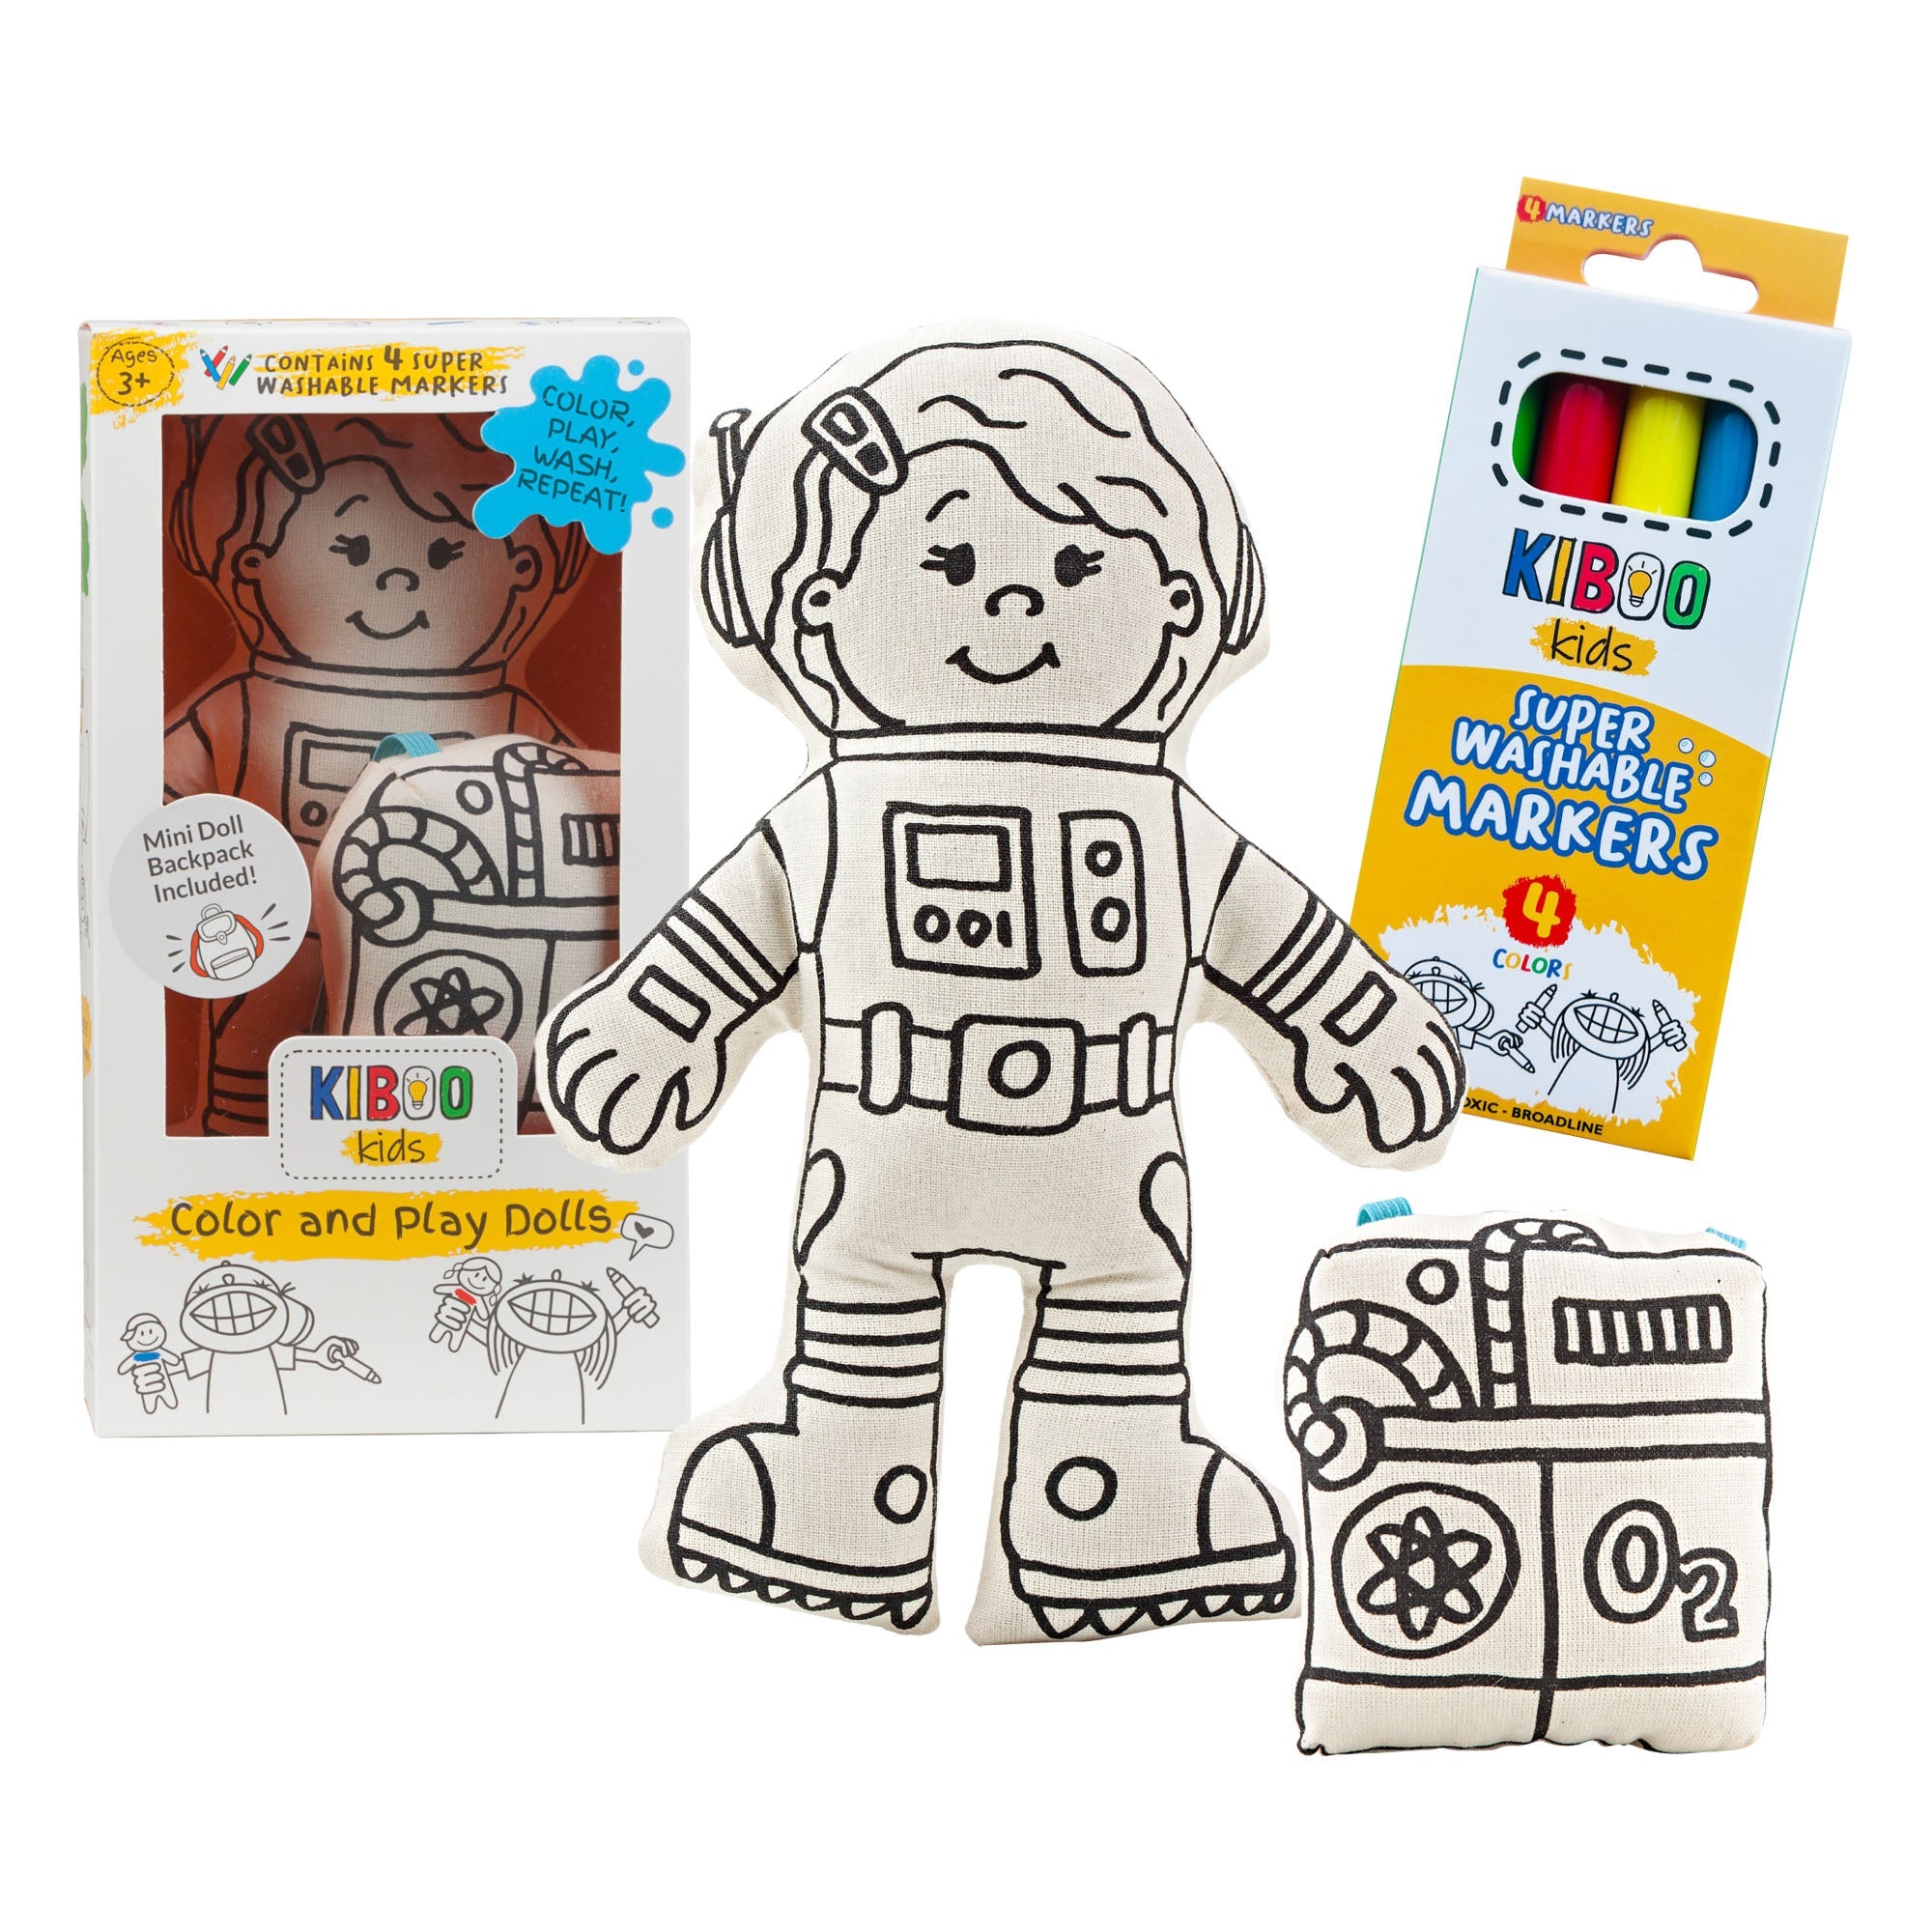 Kiboo Kids Space Explorer: Girl Astronaut Doll With Mini Space Pack - Educational And Imaginative Play Toy